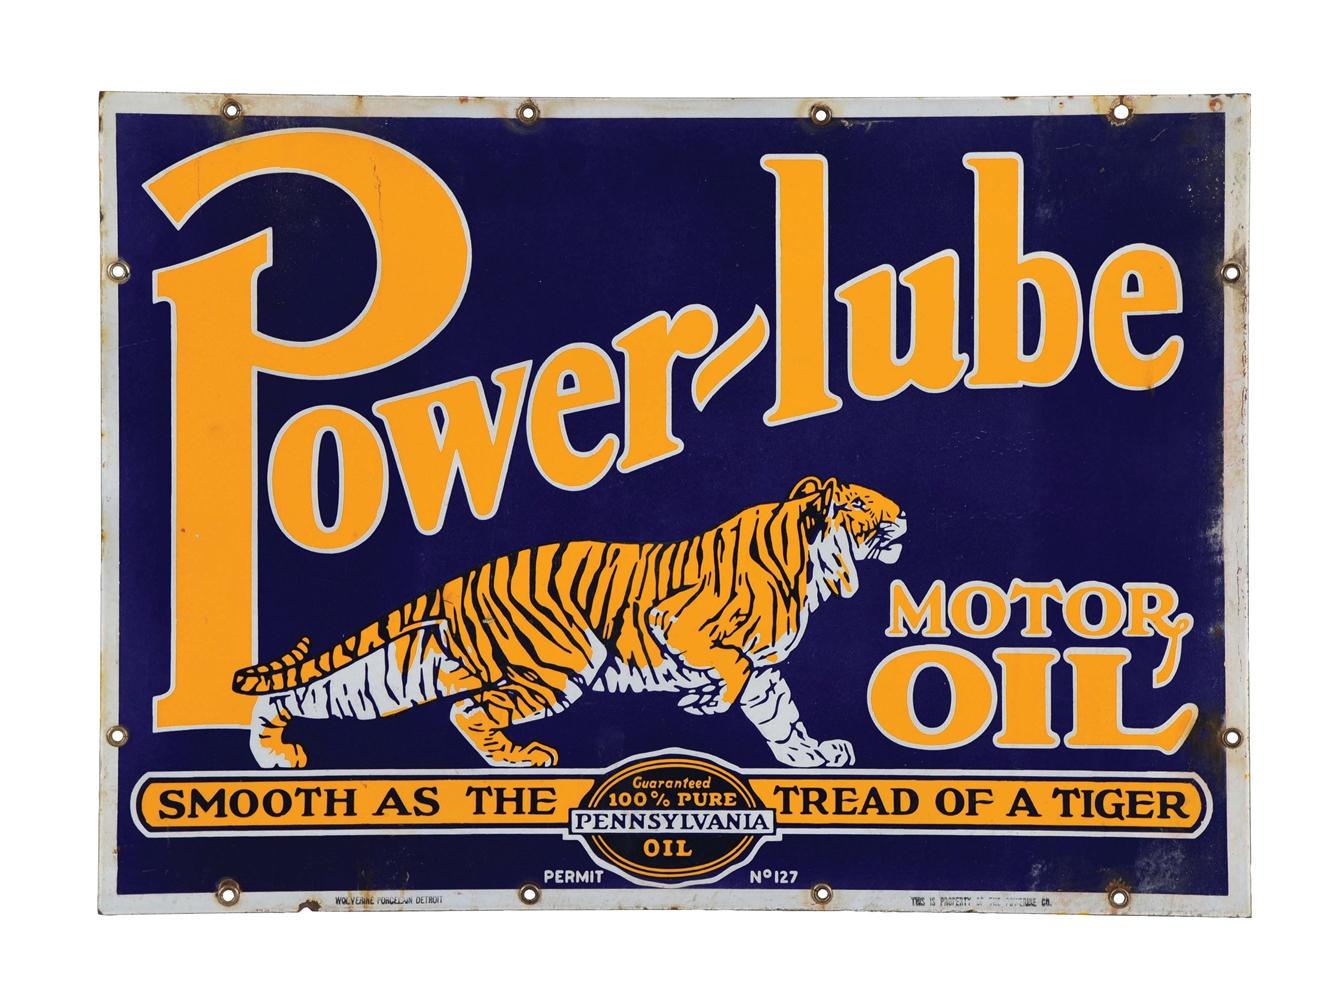 POWER-LUBE MOTOR OIL PORCELAIN SERVICE STATION SIGN W/ TIGER GRAPHIC.